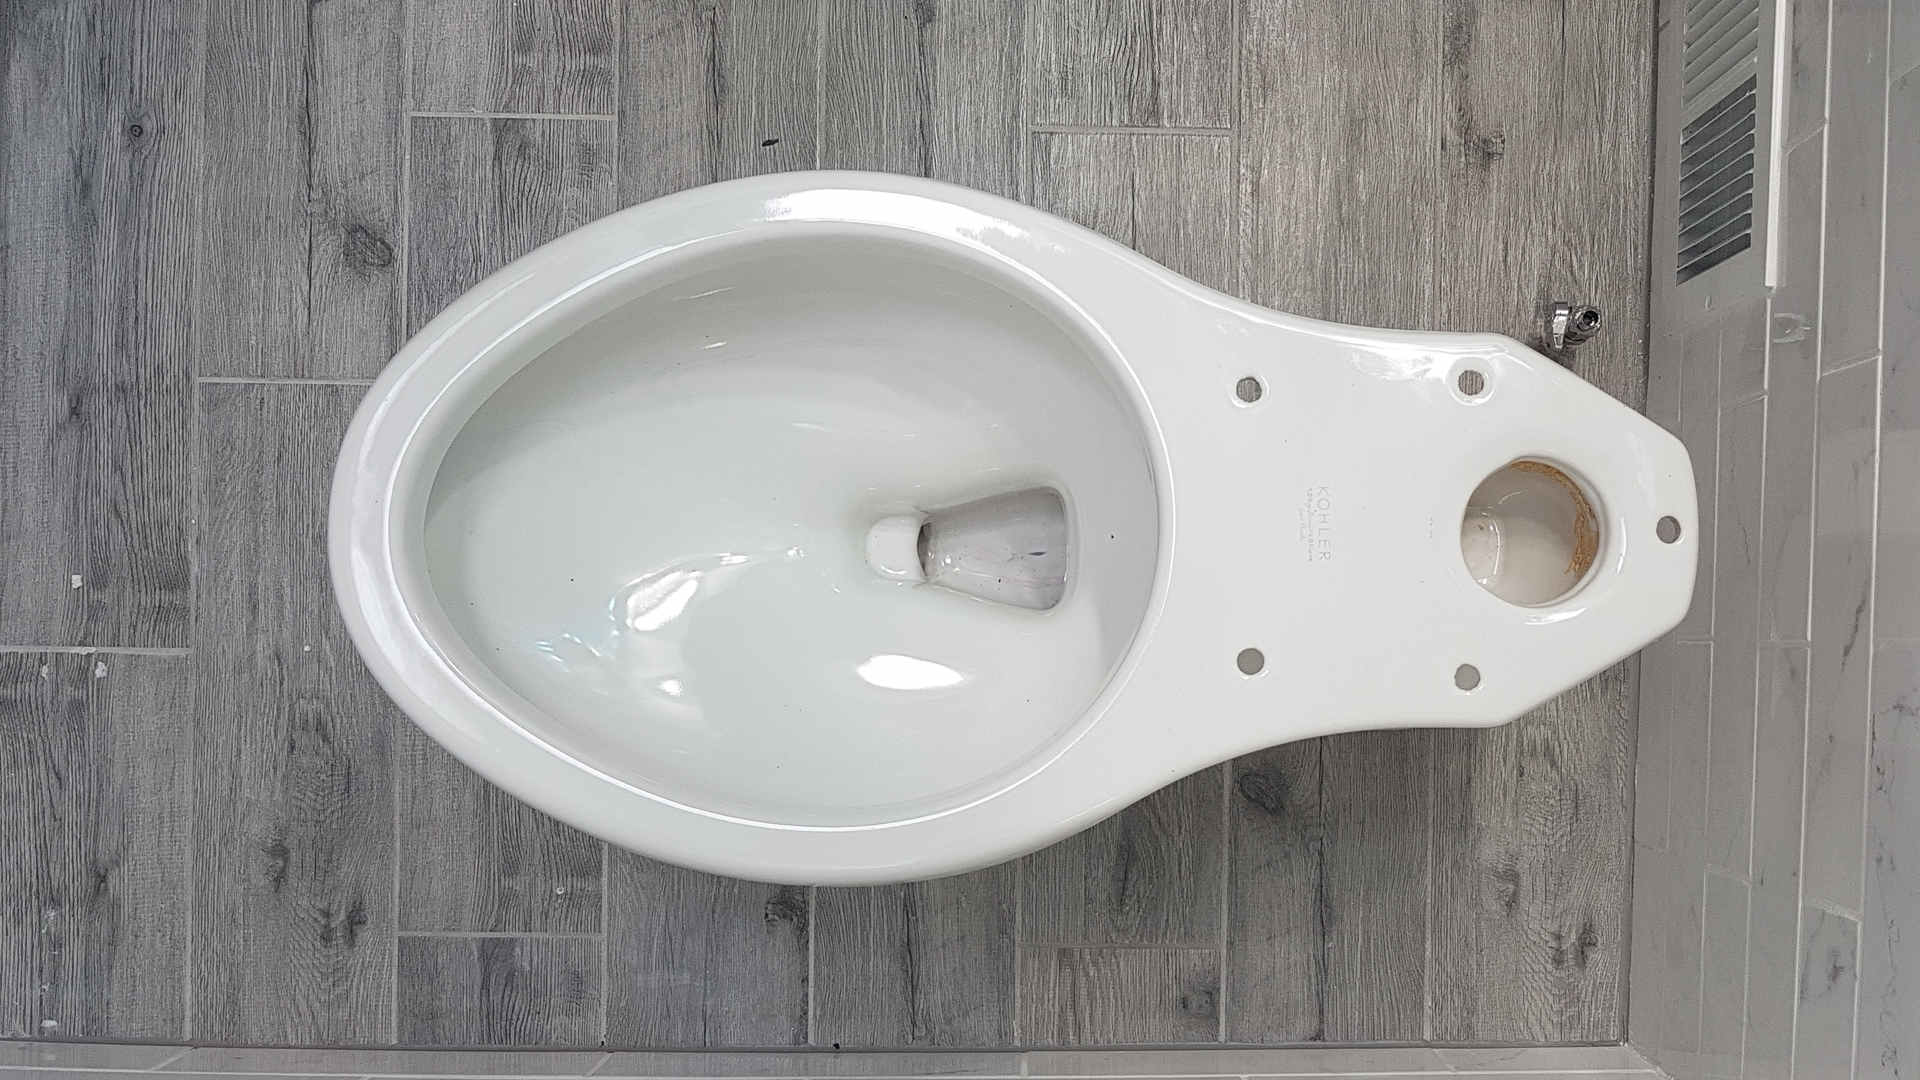 How long does it take to Replace a Toilet